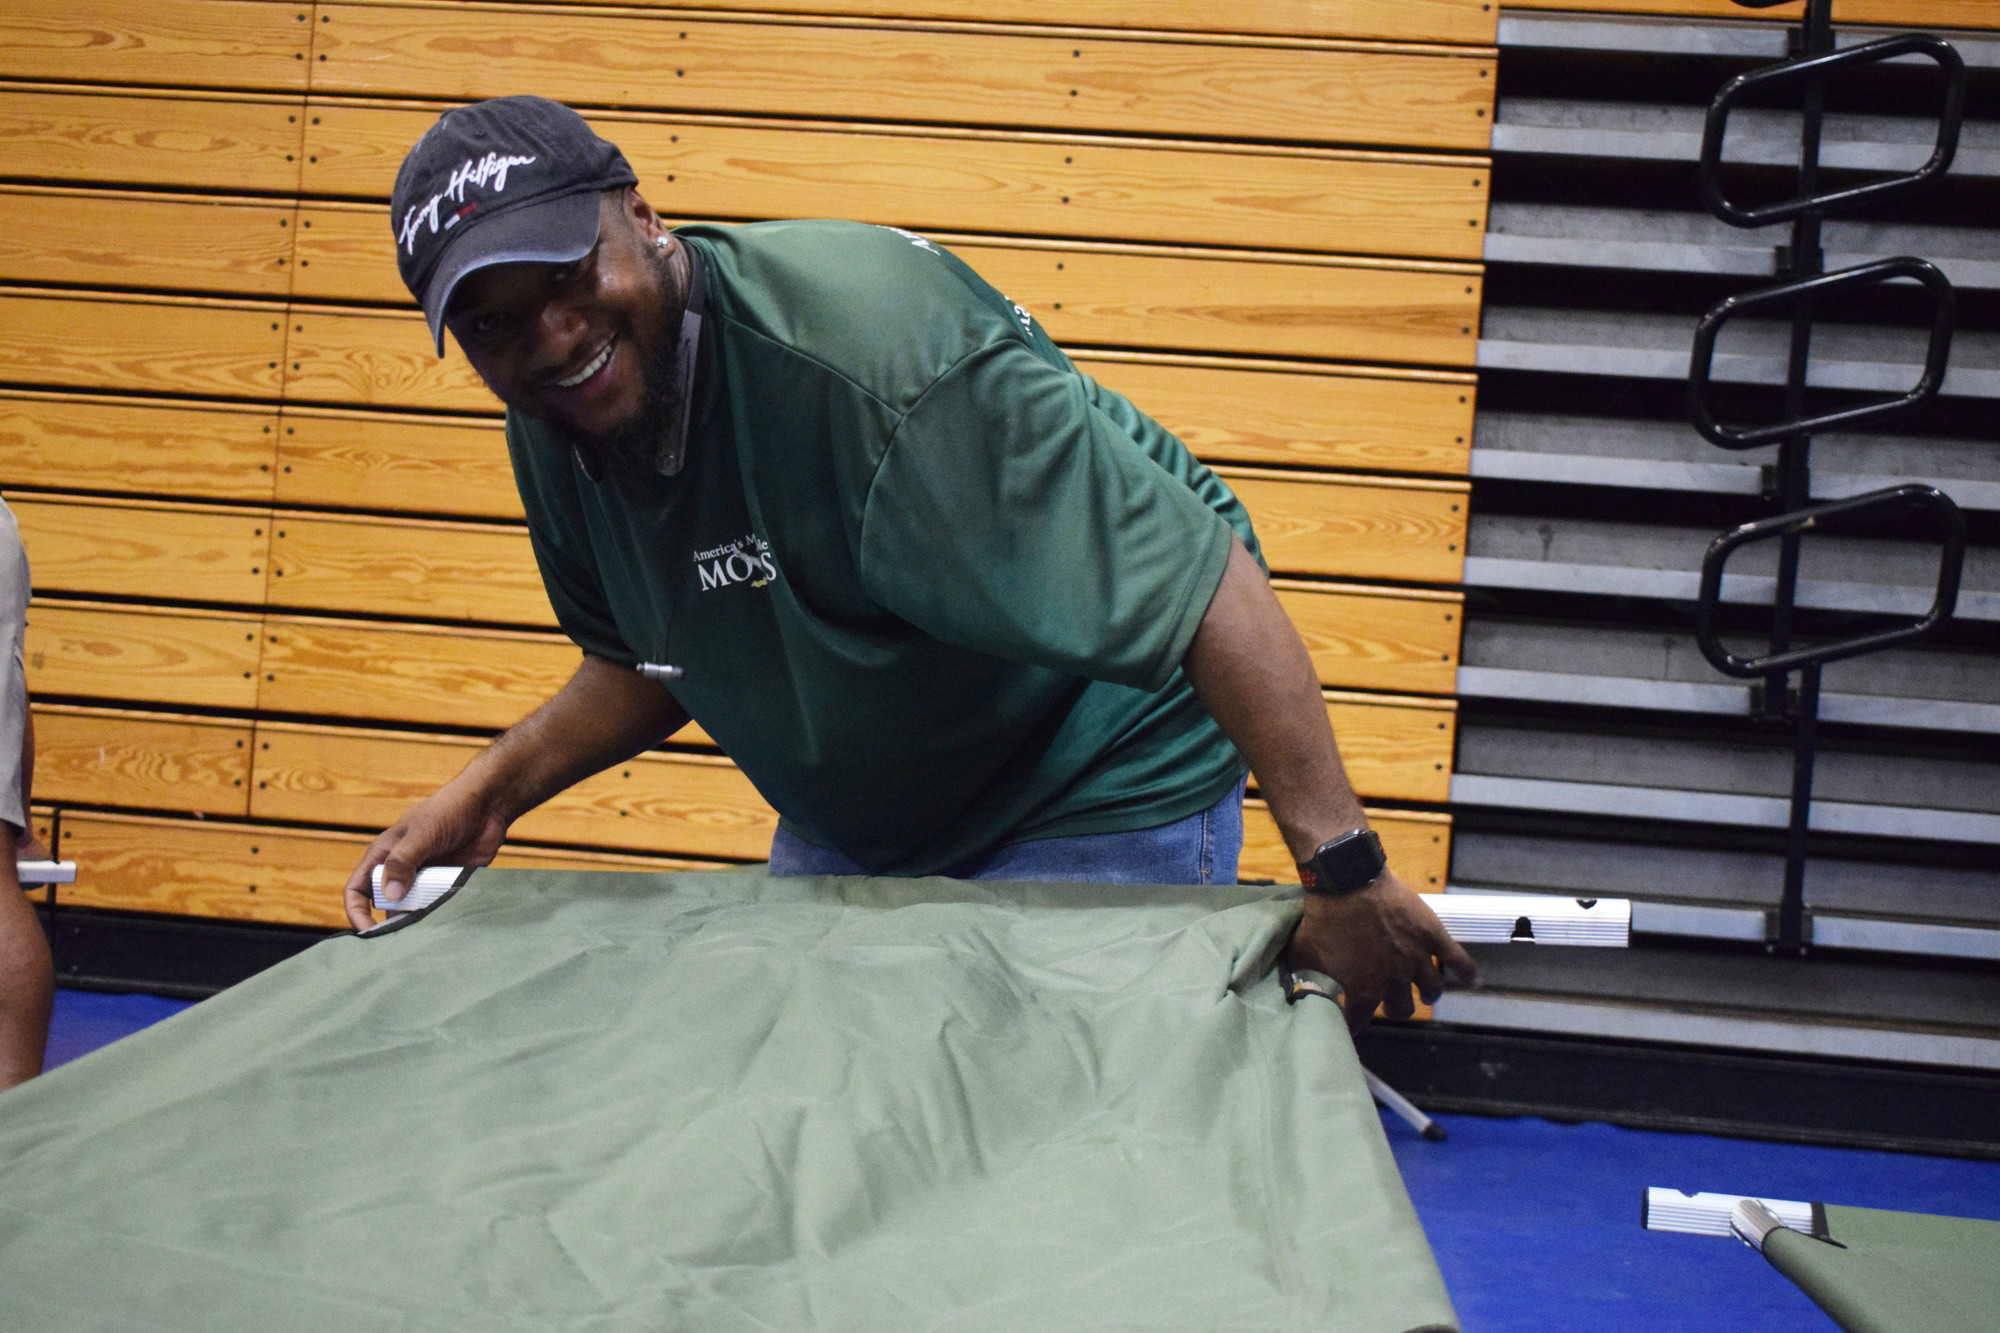 Kirey Whitehead with AMR Movers helps set up cots at R. Dan Nolan Middle School. (Photo by Liz Ramos)